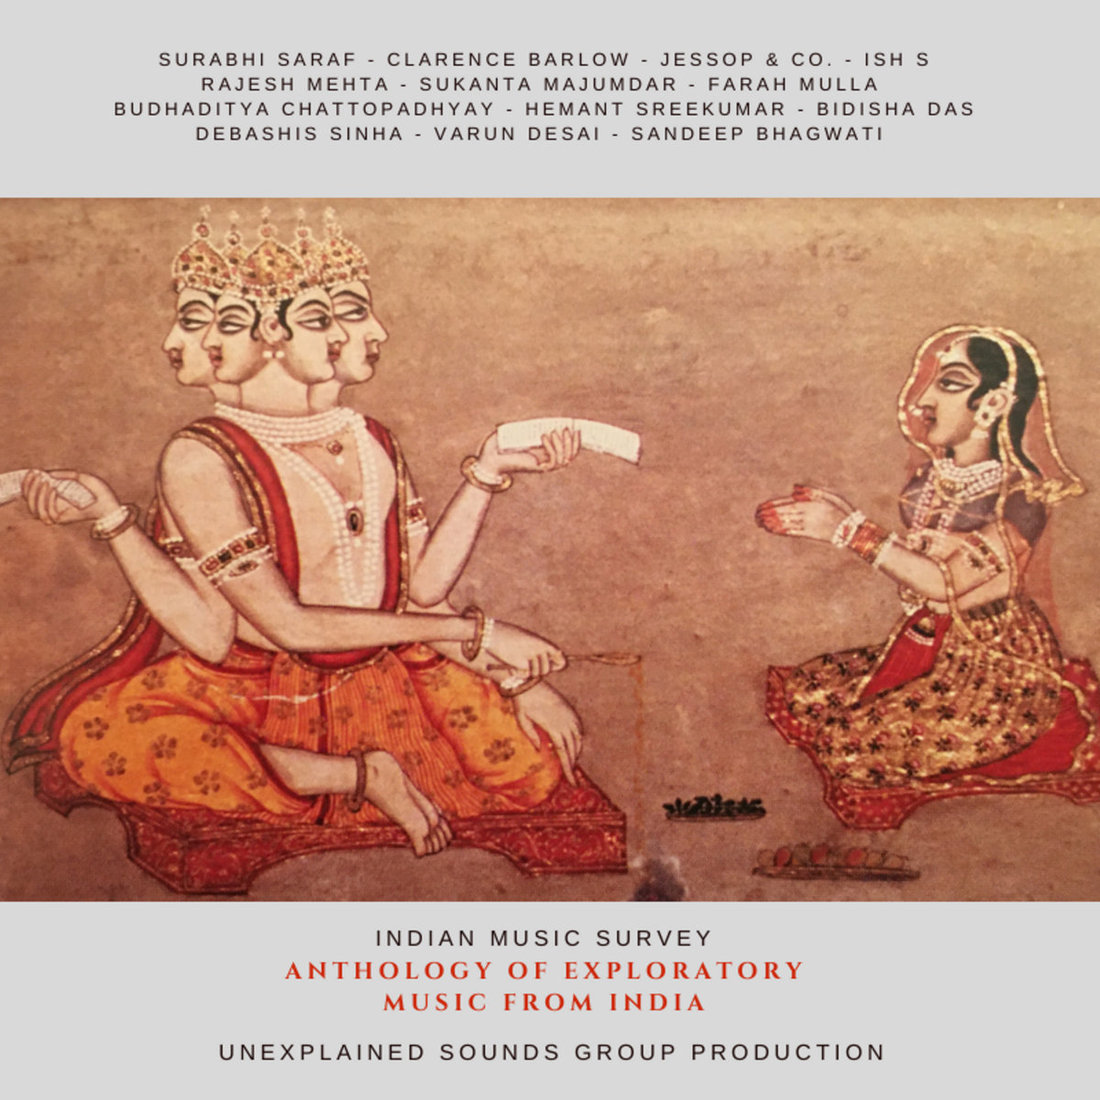 V.A. - Anthology Of Exploratory Music From India (Unexplained Sounds Group)